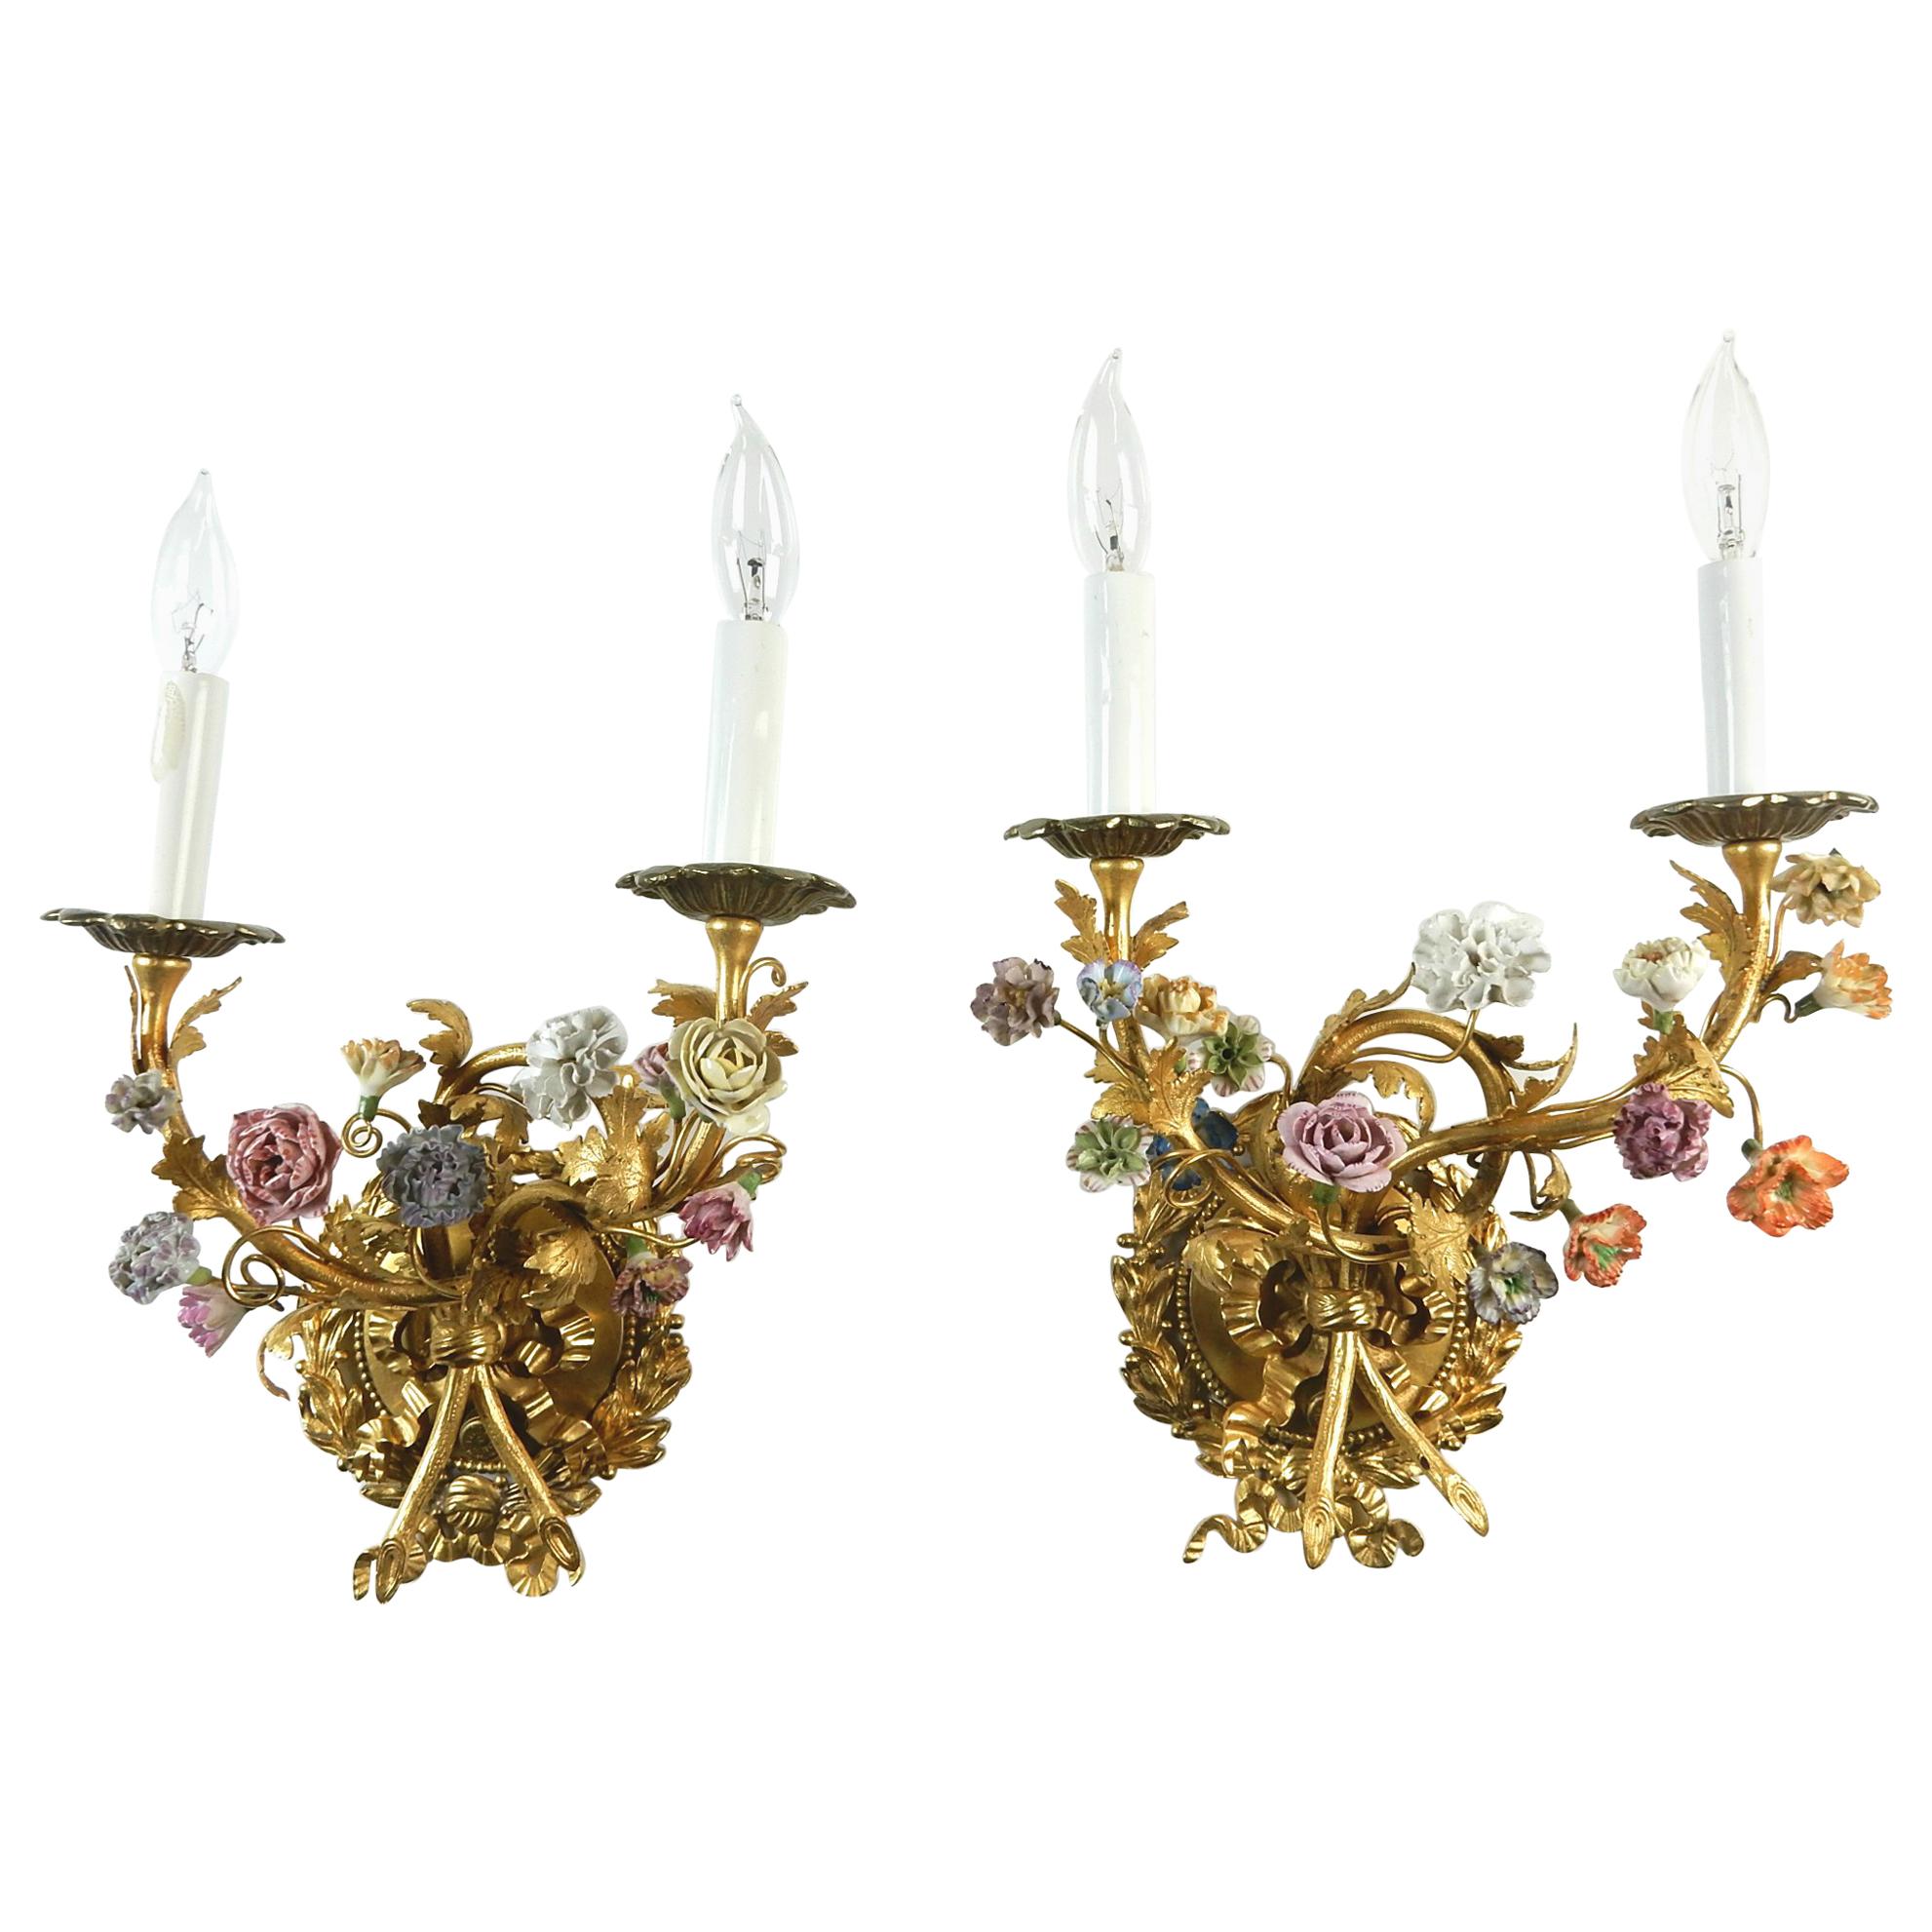 Vintage Gilded Wall Sconces with Hand Painted Porcelain Flowers